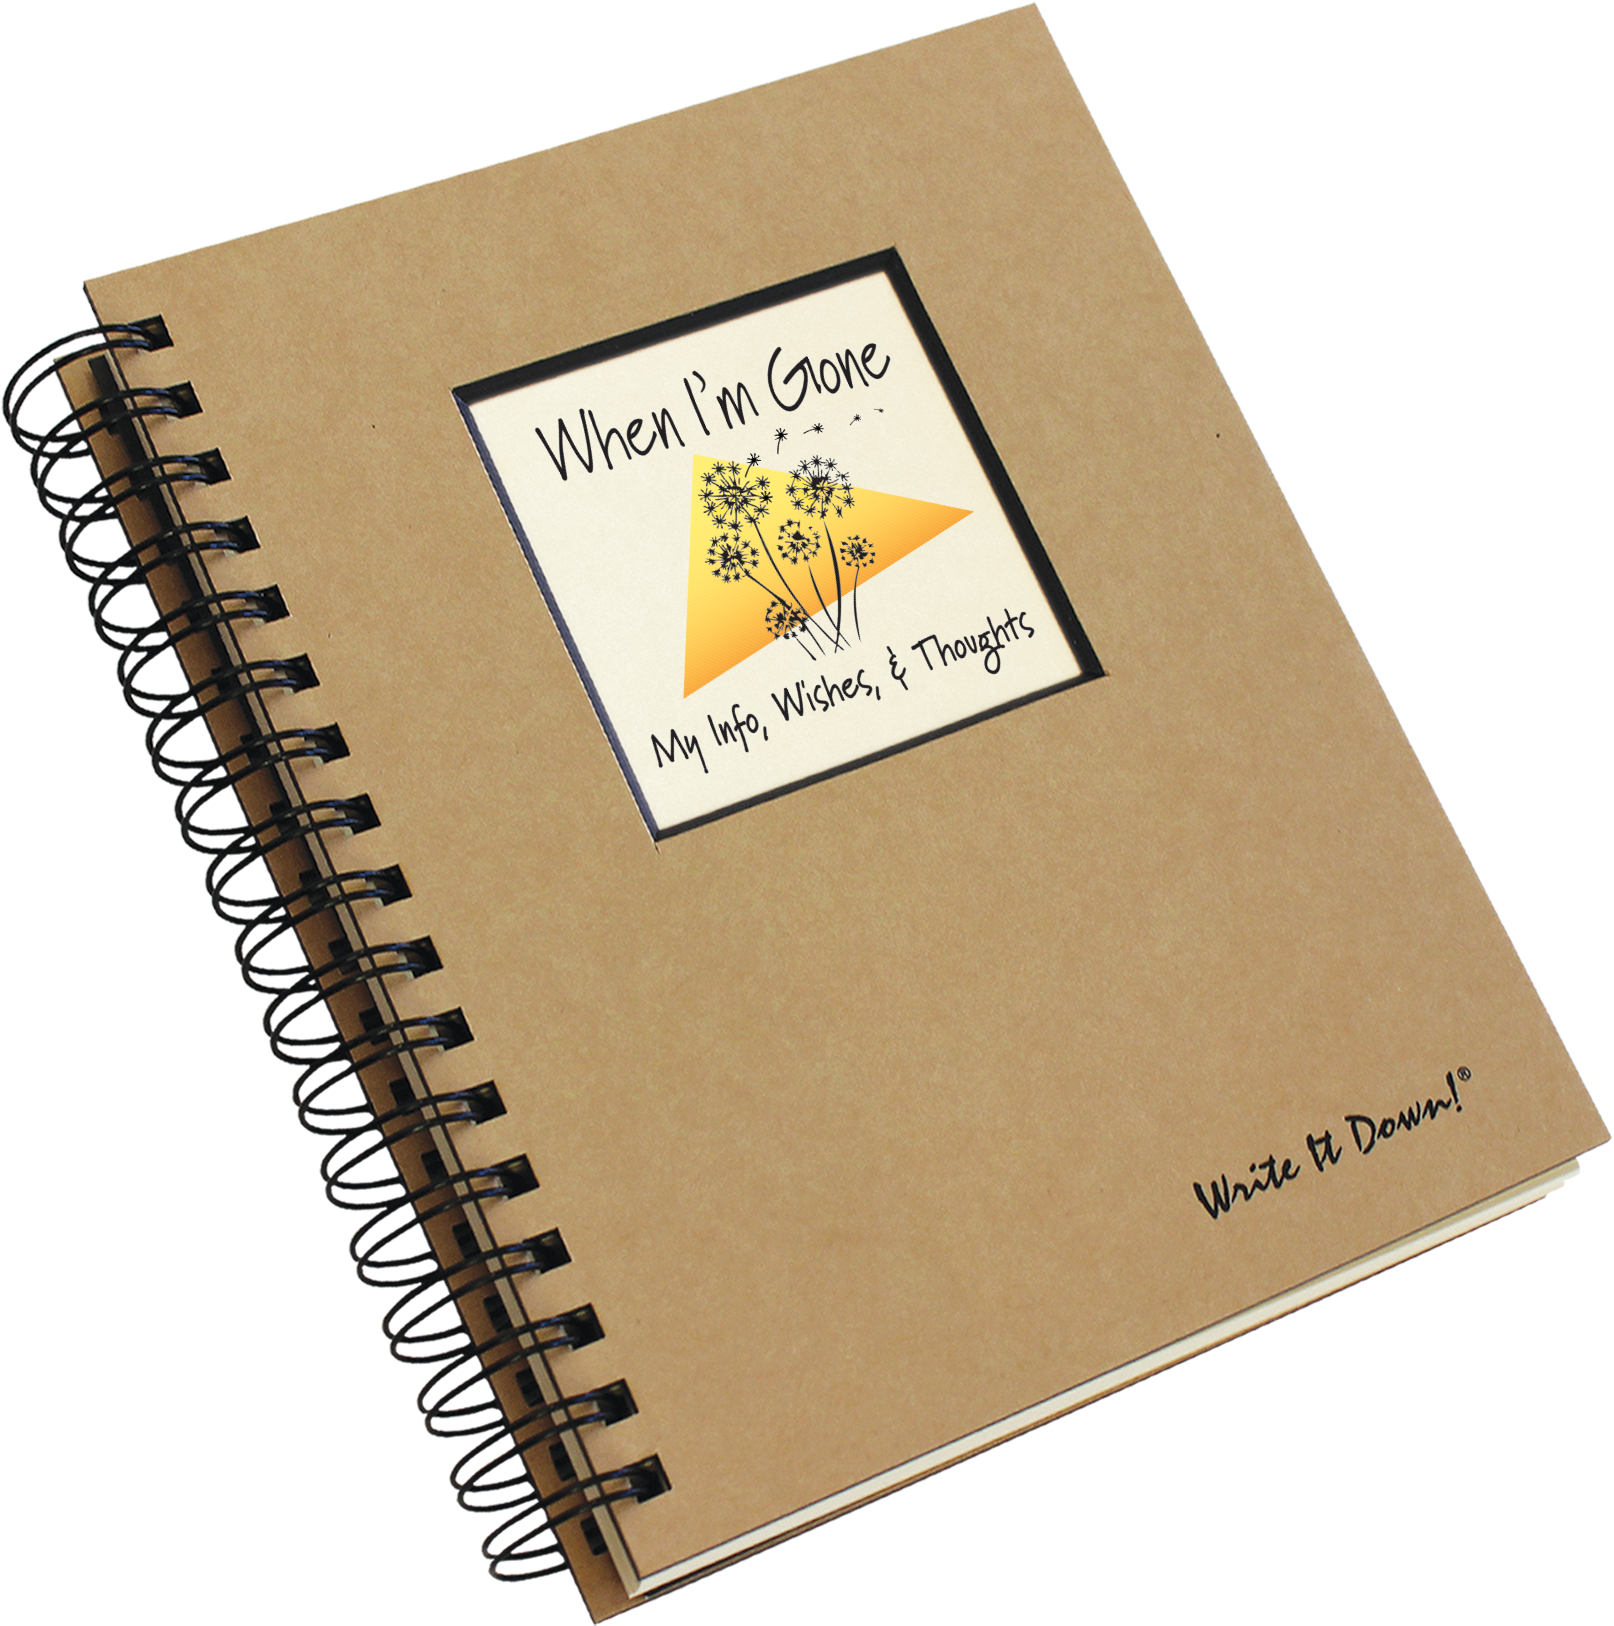 When I'm Gone My Info Wishes & Thoughts Journal - Retirement Journal (1736x1736)